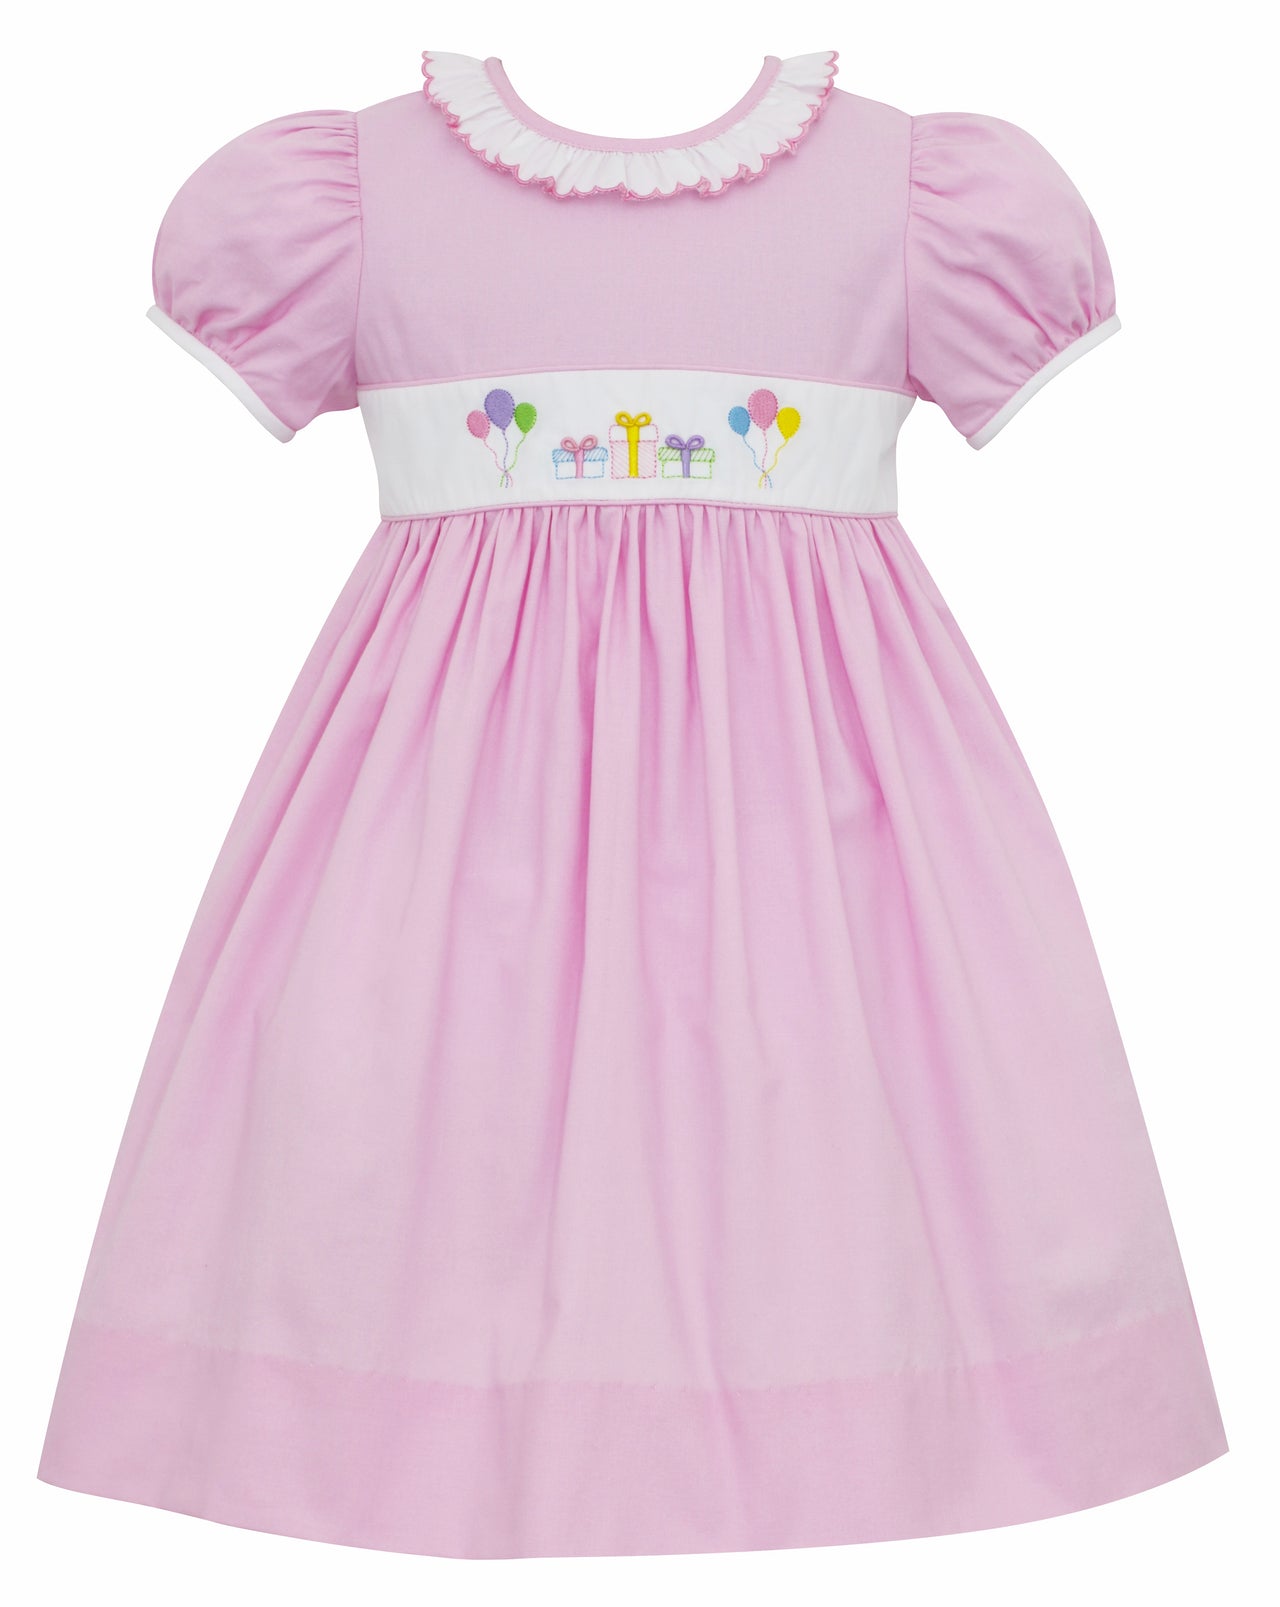 Anavini Birthday Pink Dress W/White Scalloped Ruffle S/S 702D-AF22